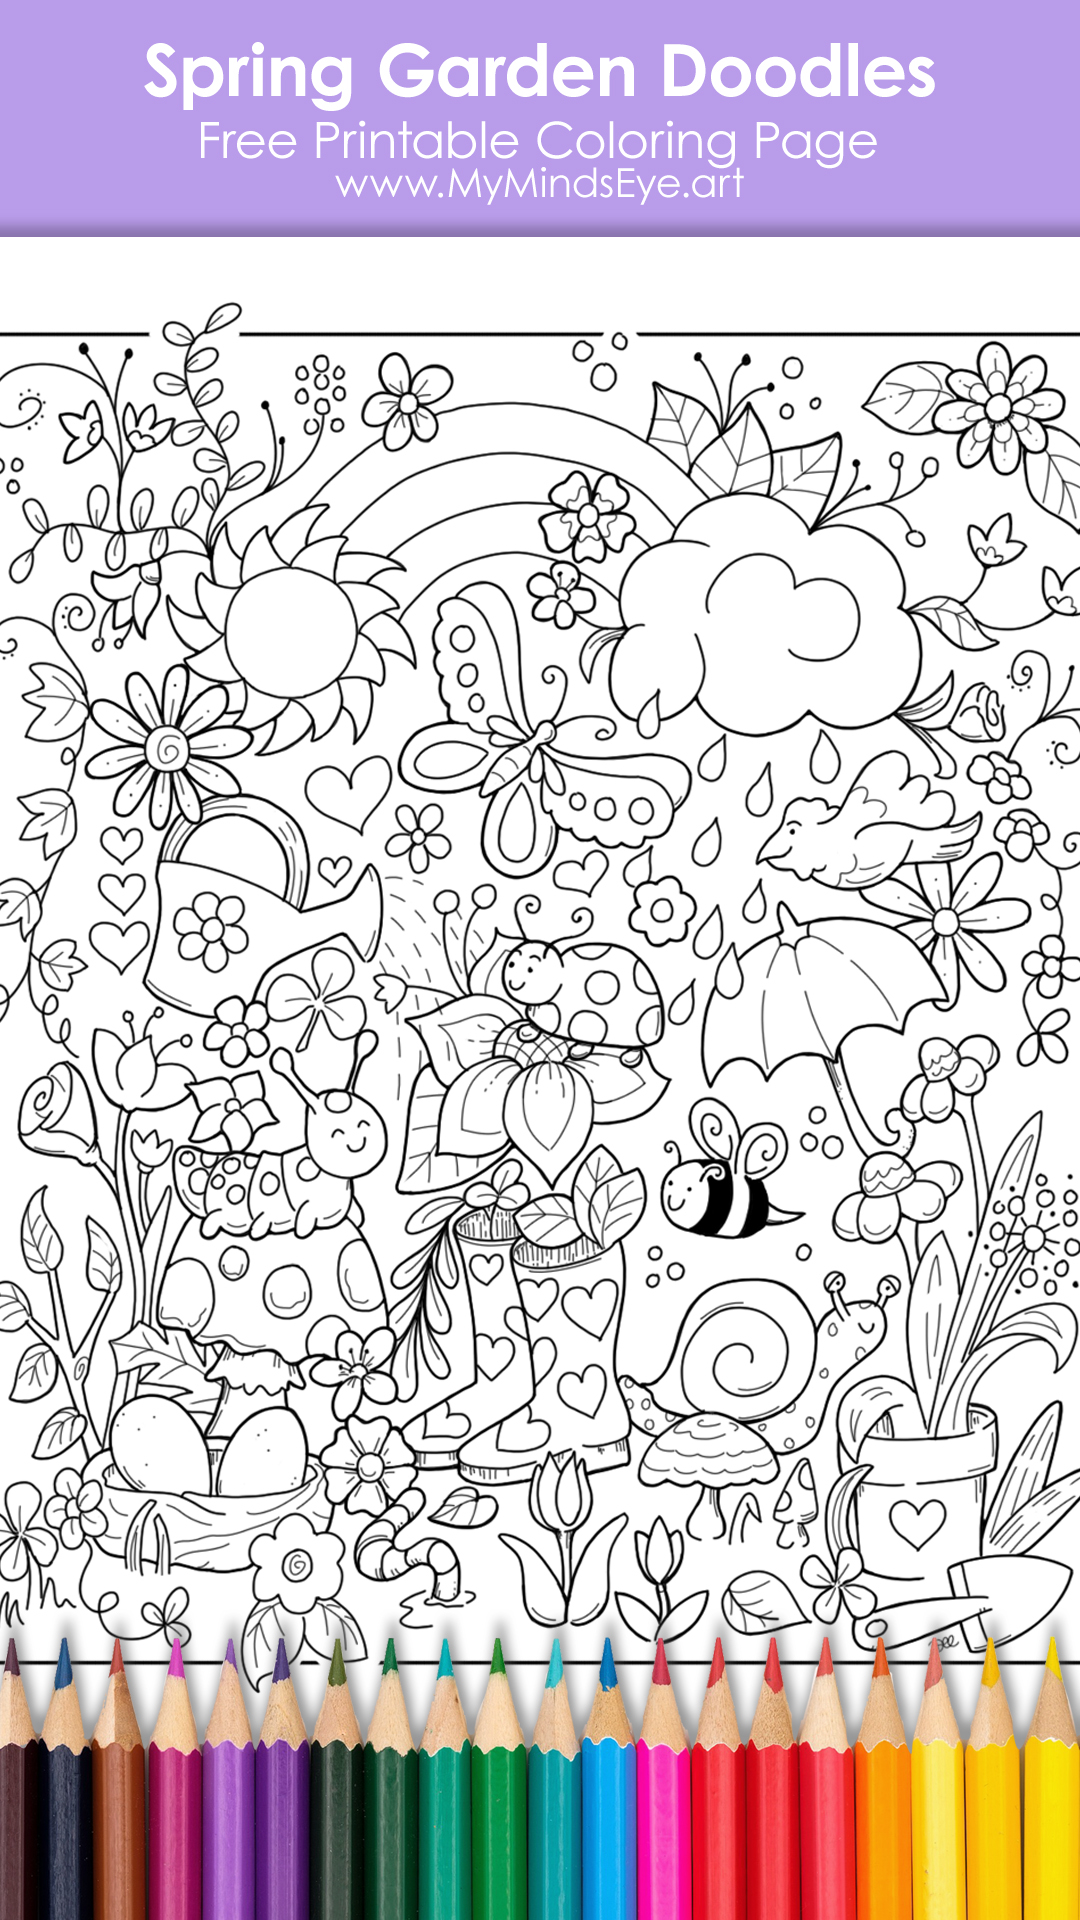 Spring garden doodles coloring page image